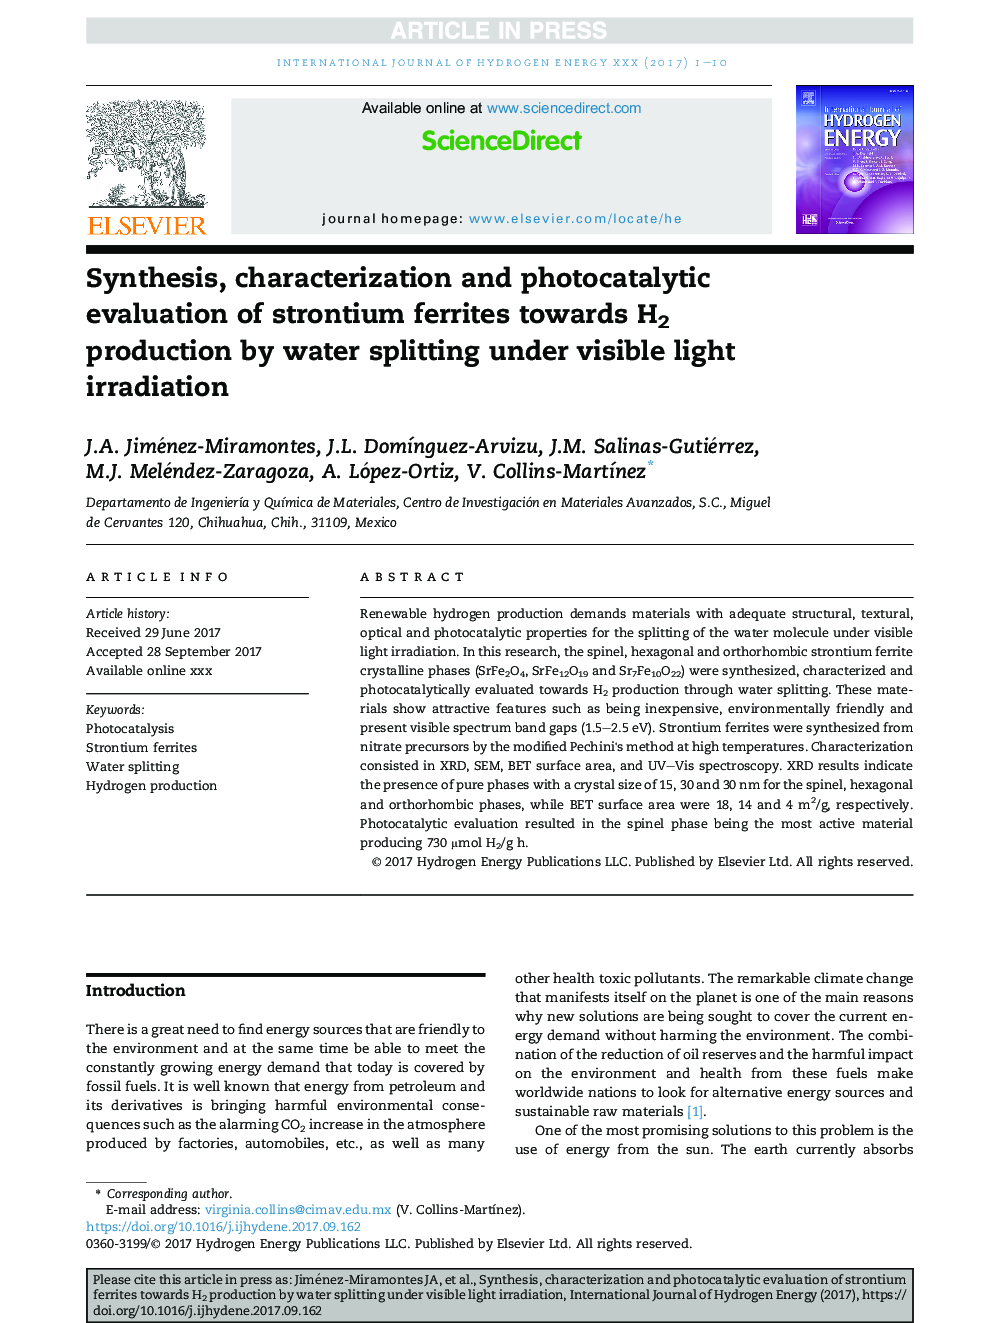 Synthesis, characterization and photocatalytic evaluation of strontium ferrites towards H2 production by water splitting under visible light irradiation